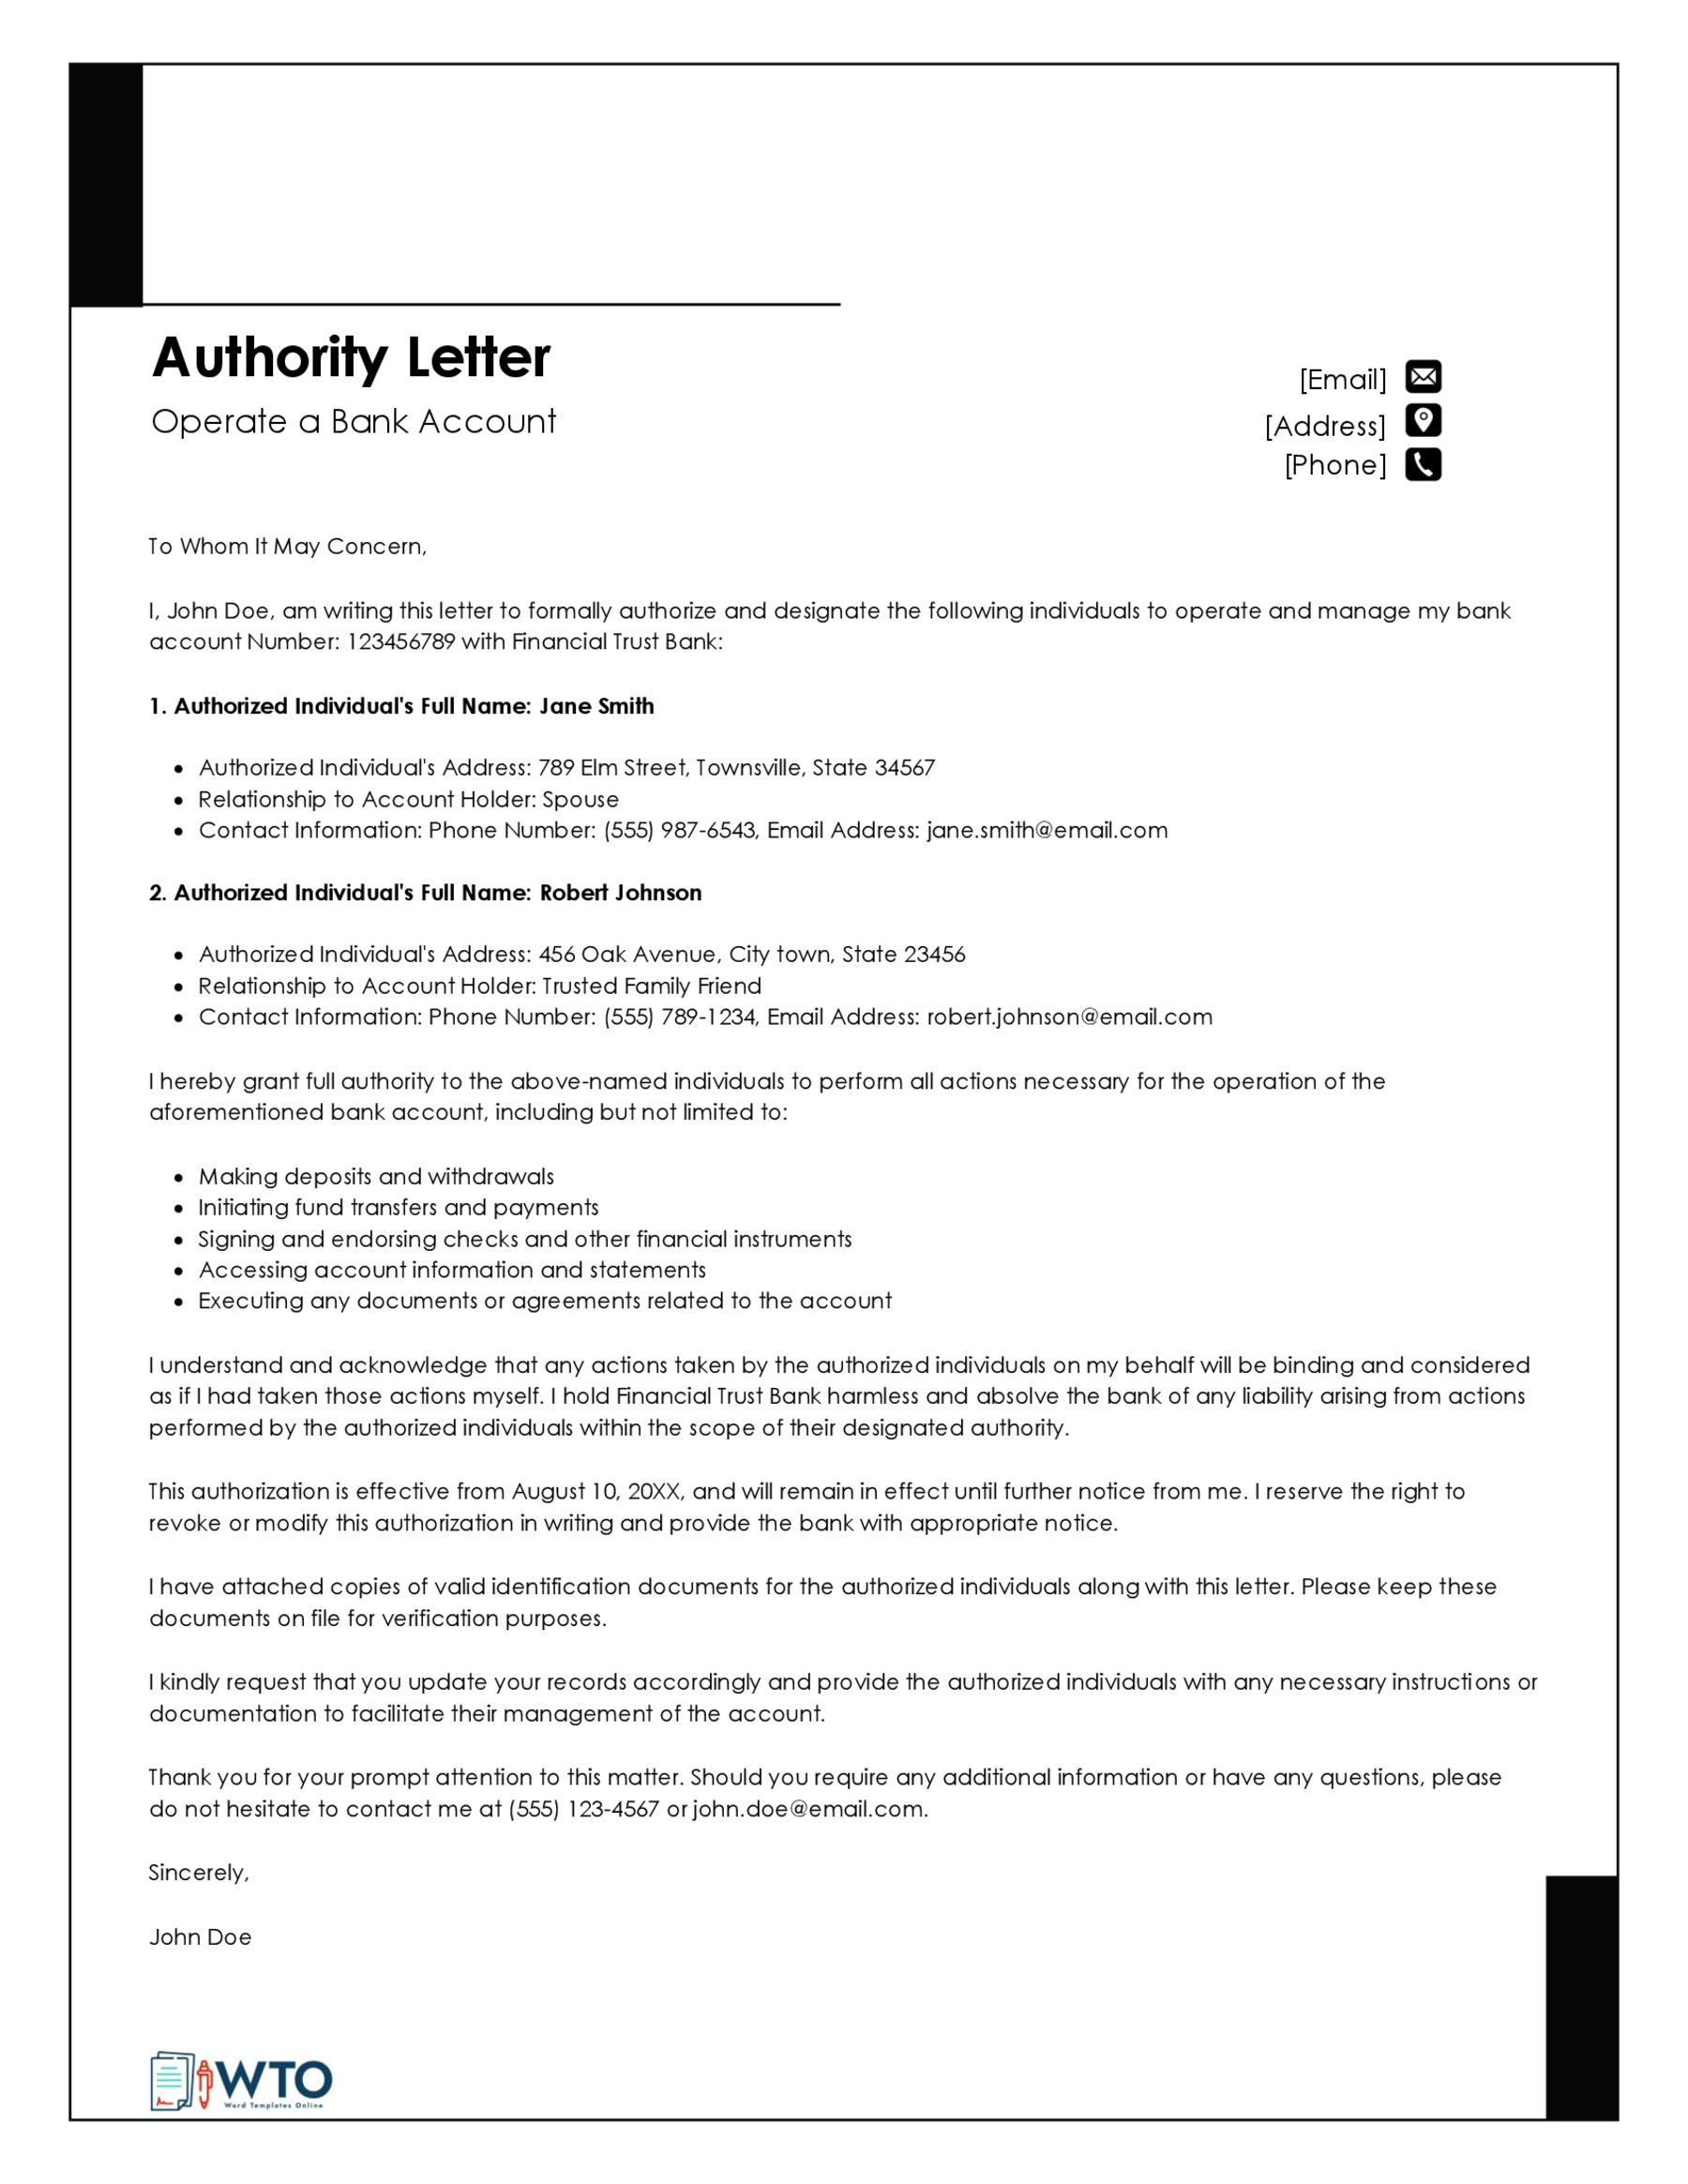 Bank Account Operation Letter example Word download